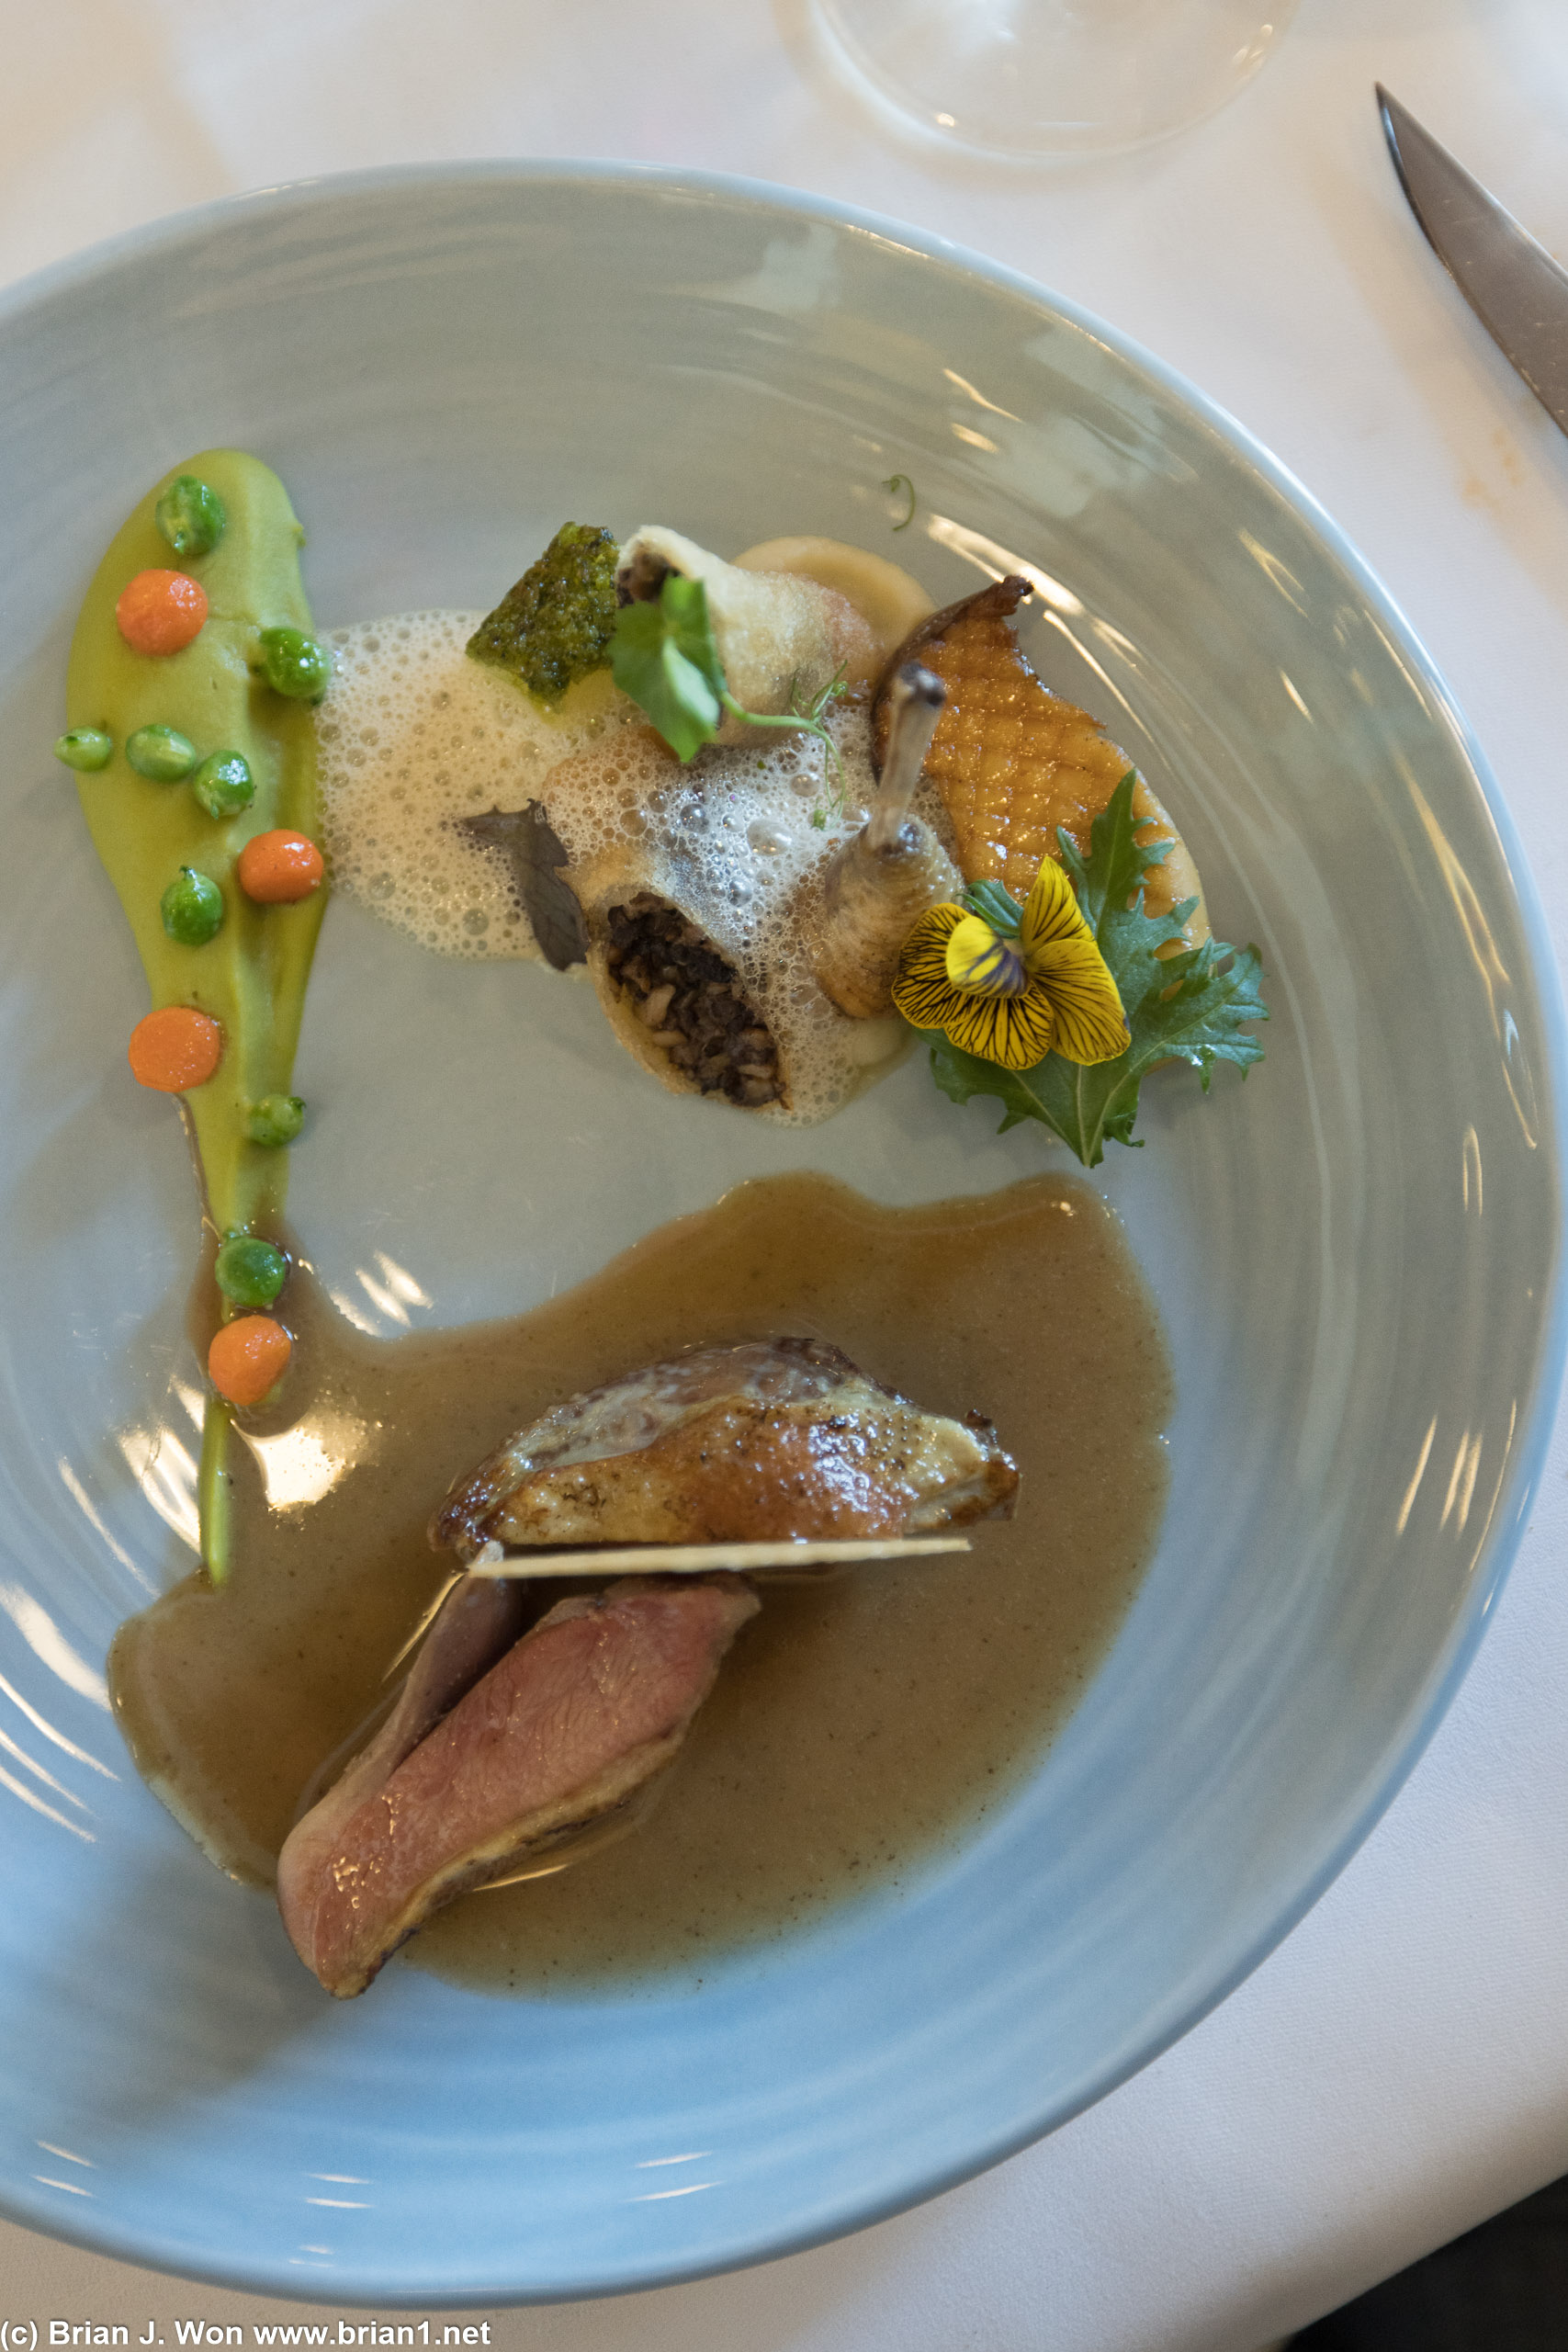 Eneour pigeon, crunchy eryngll with roasted honey, pea puree with wasabi, cep foam.